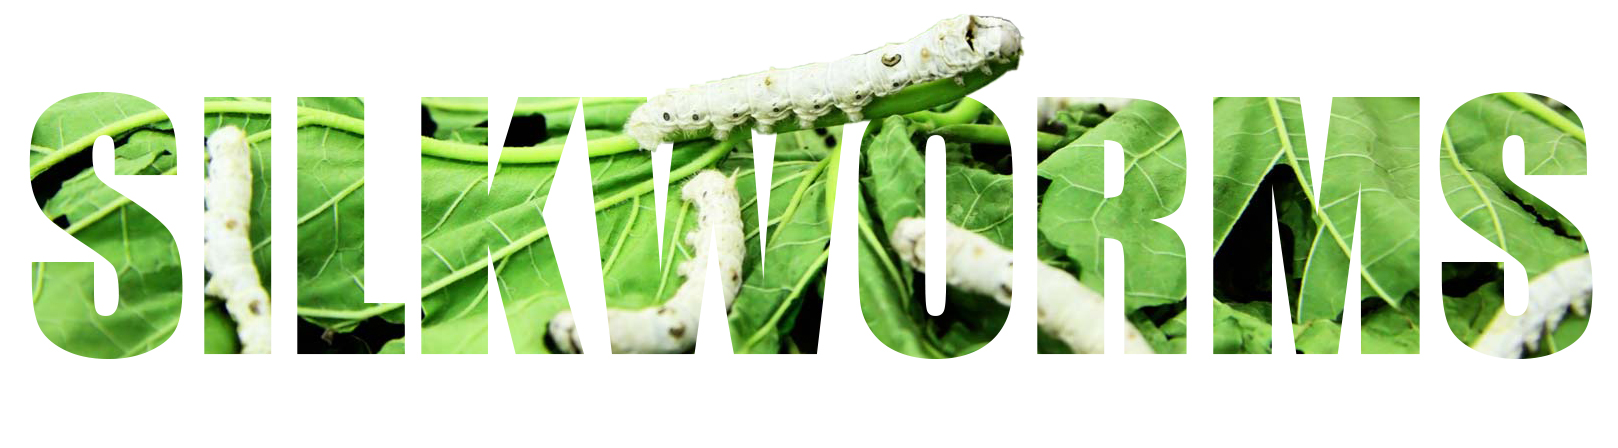 Buy Silkworms For Sale Chow